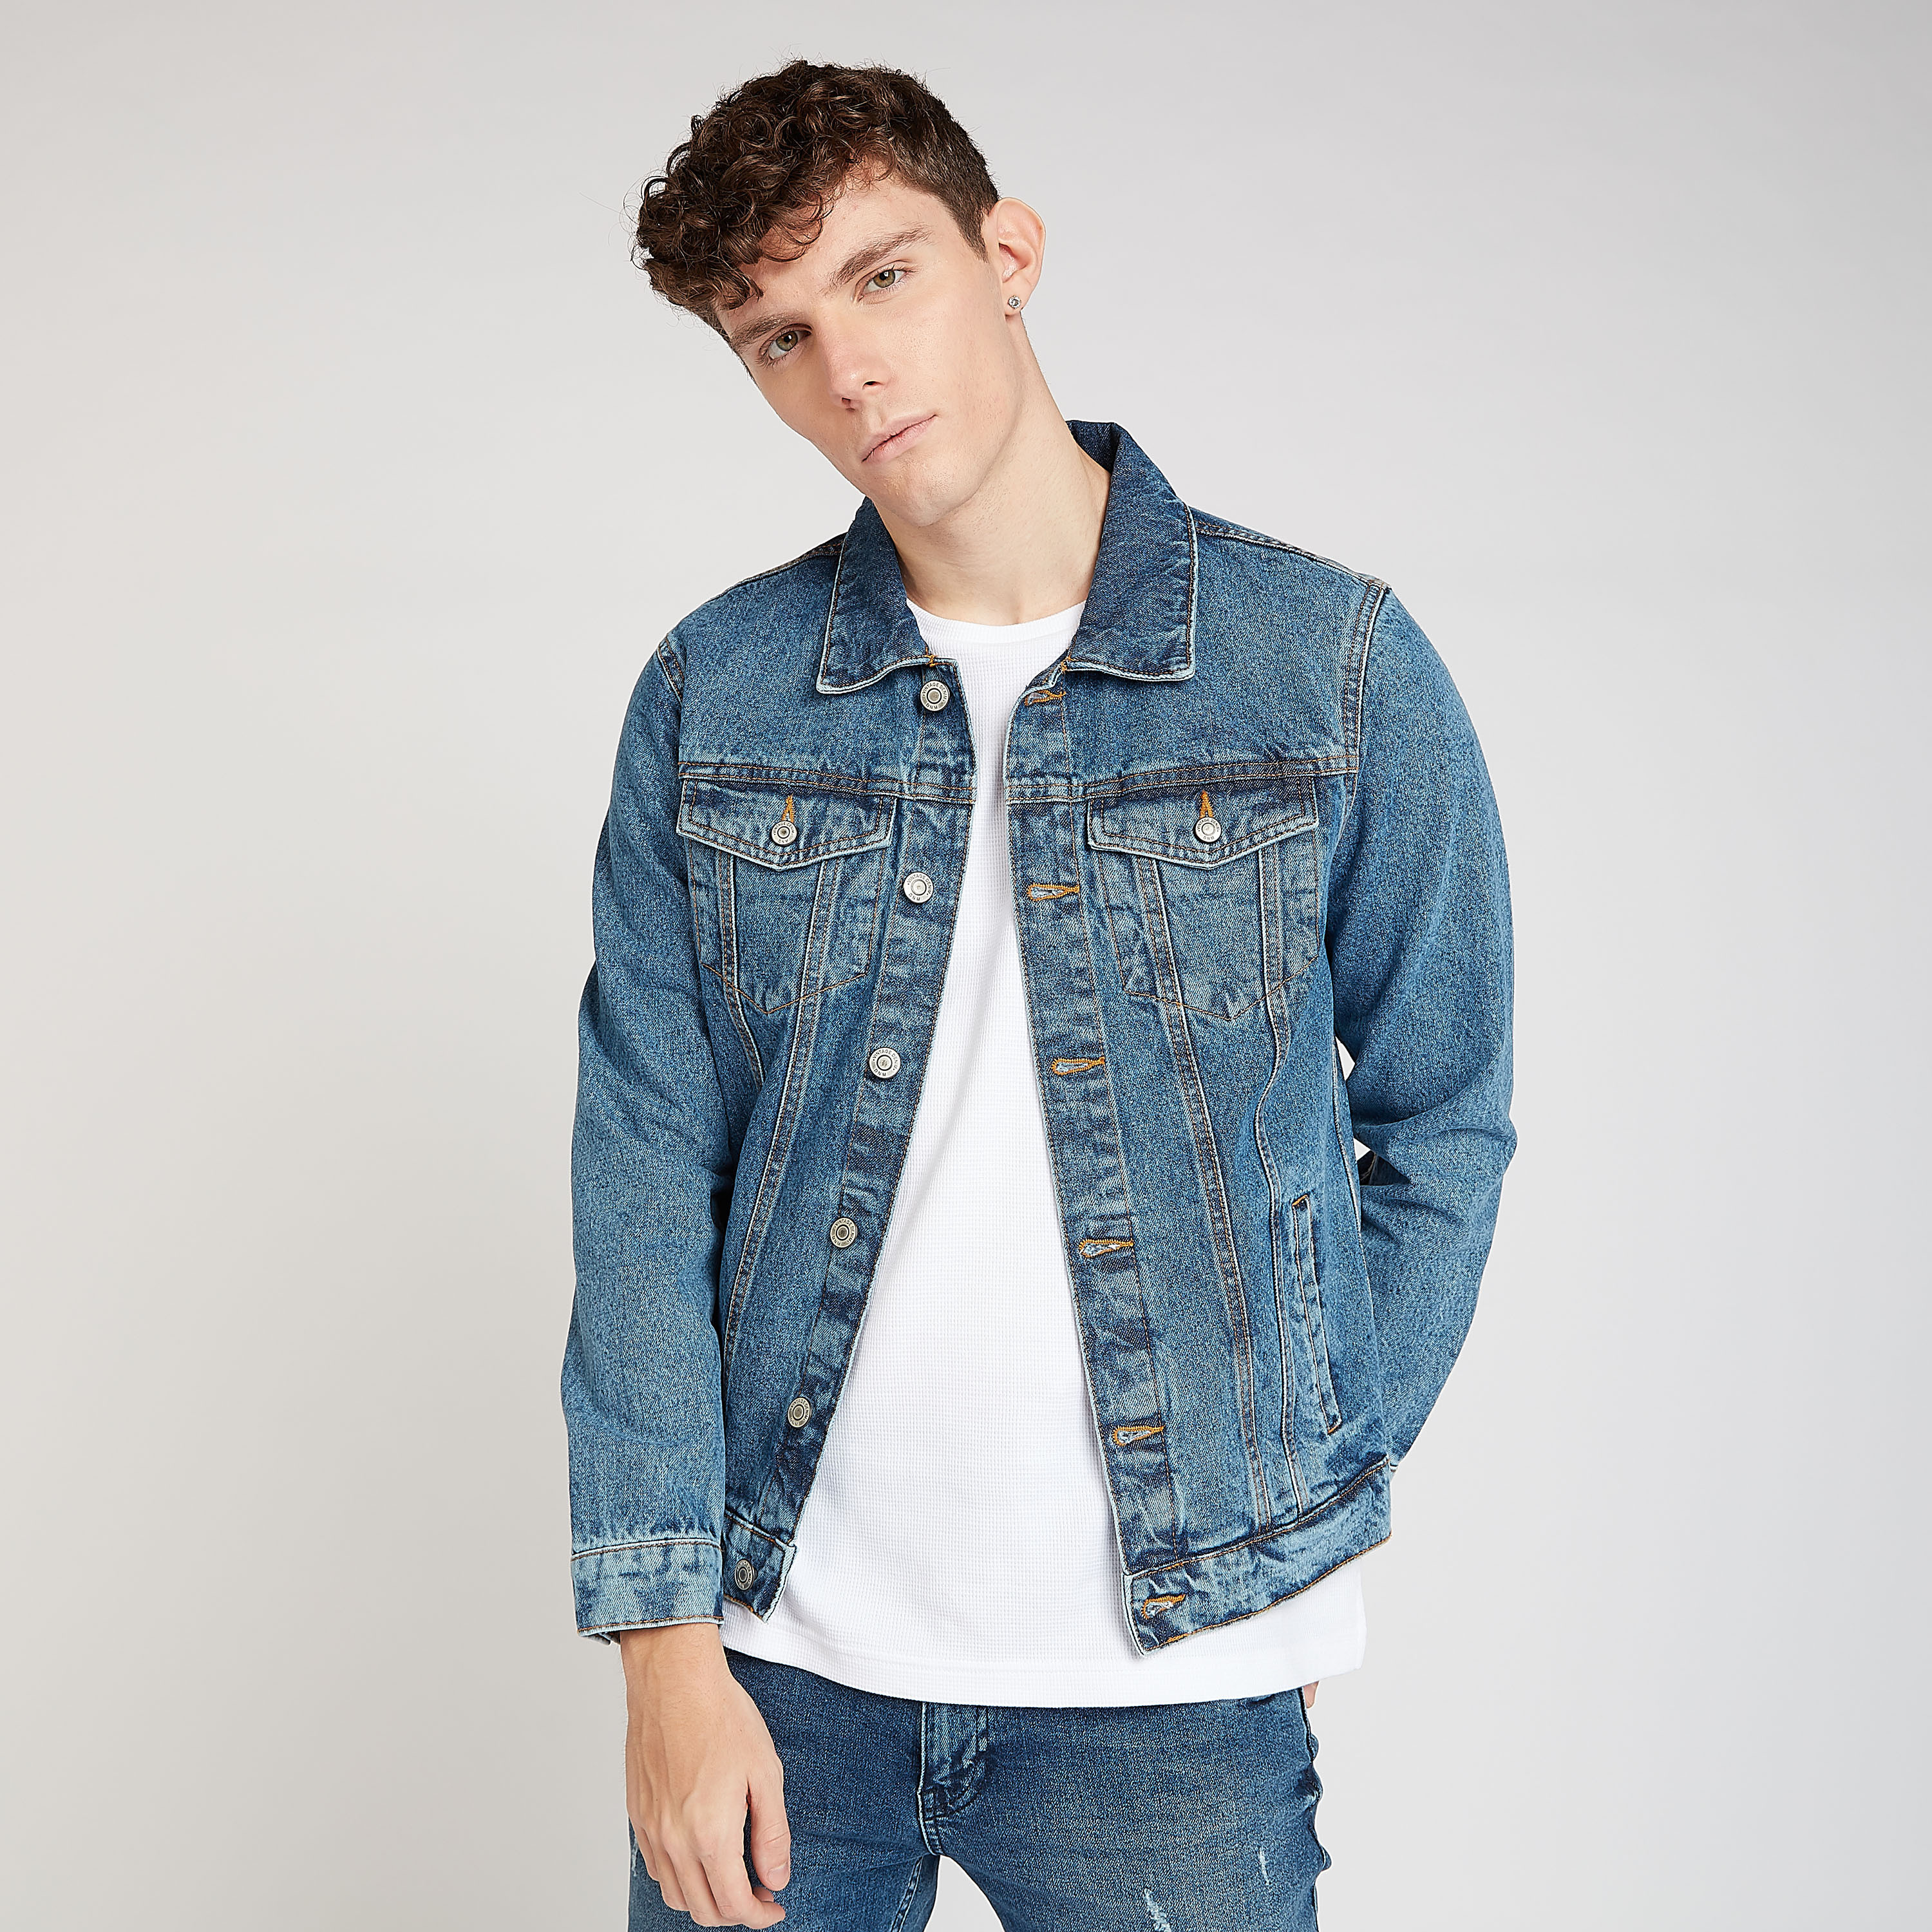 Textured Denim Jacket with Long Sleeves and Flap Pockets